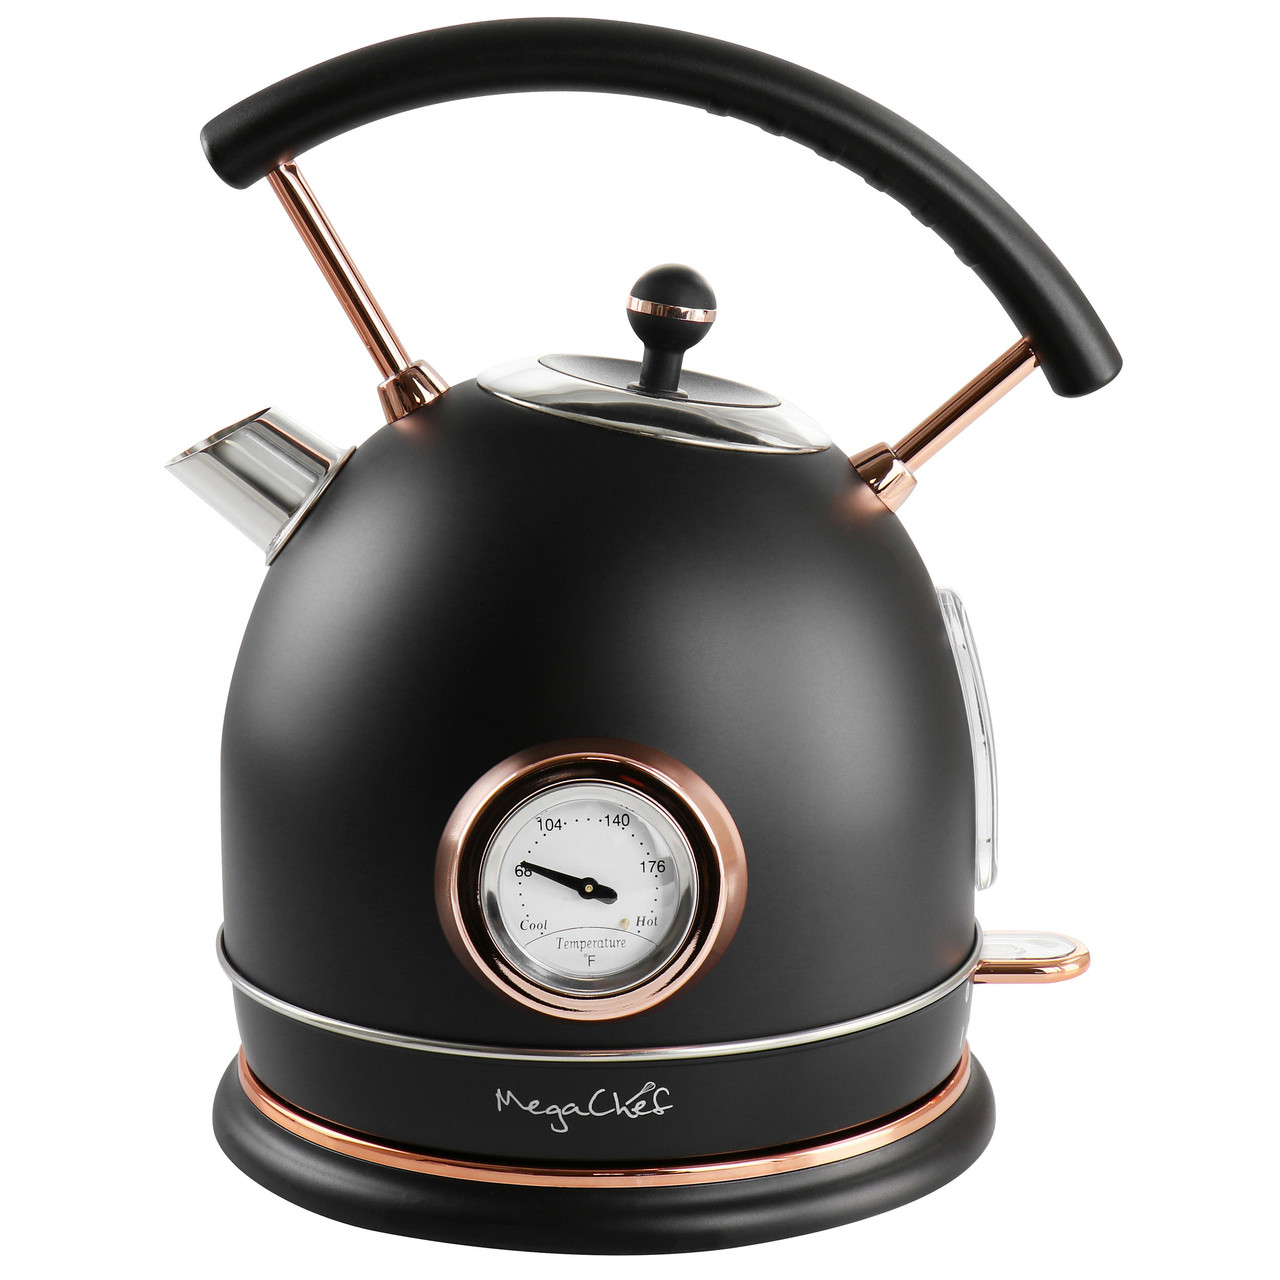 MegaChef 1.7Lt. Glass and Stainless Steel Electric Tea Kettle 